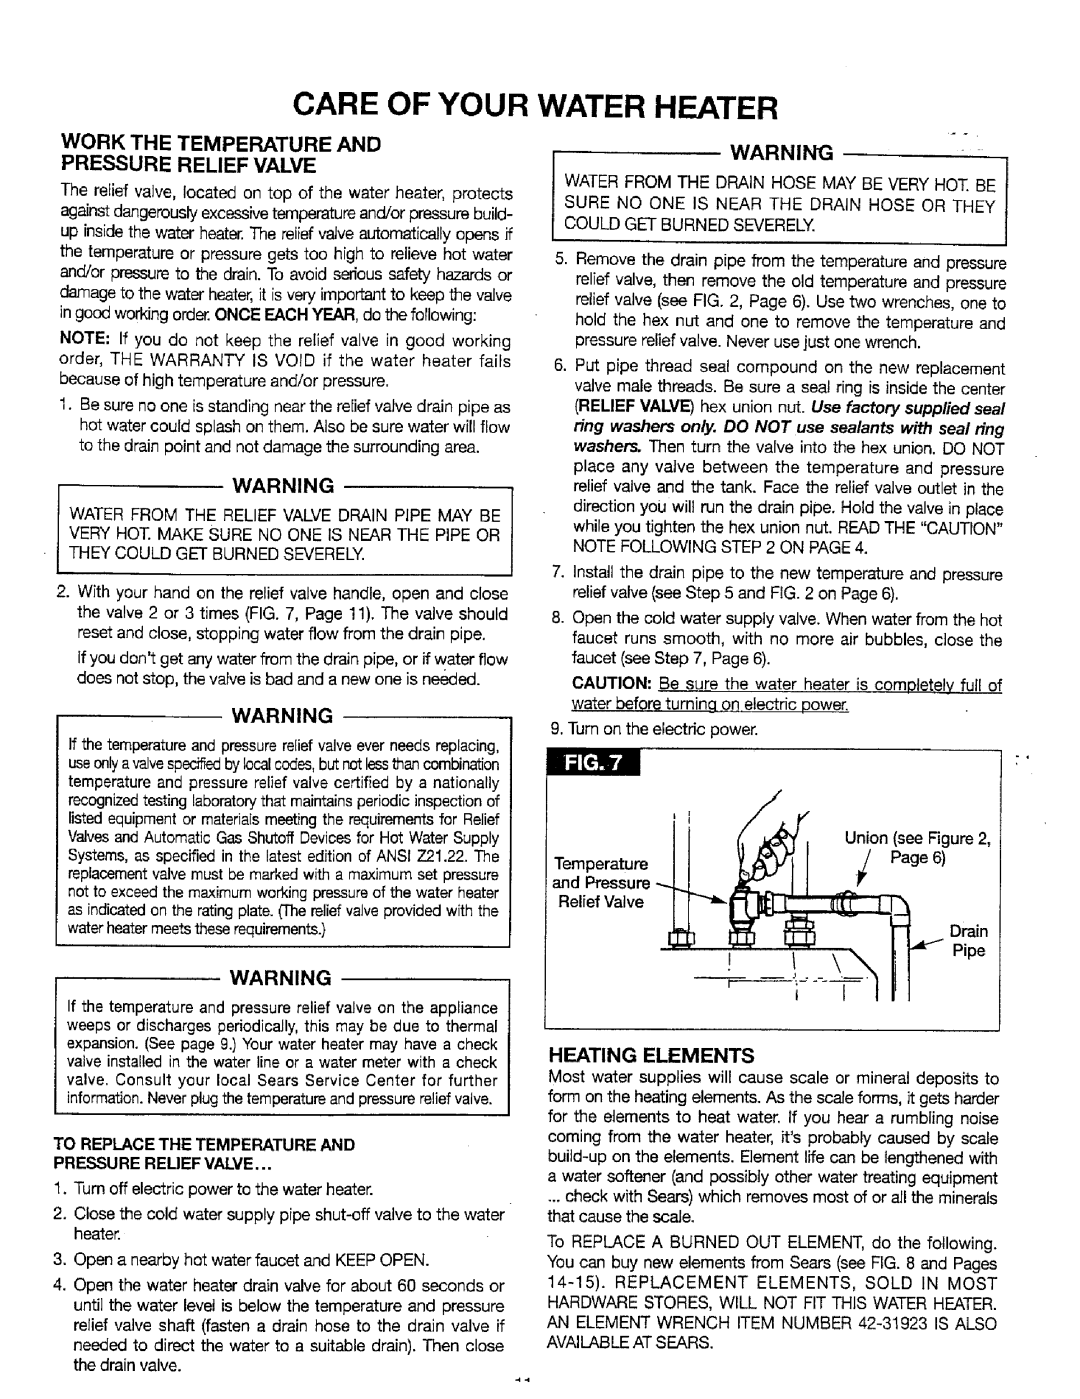 Sears 449.320311 Care Of Your, Water Heater, Work The Temperature And Pressure Relief Valve, il=ilyi, Heating Elements 